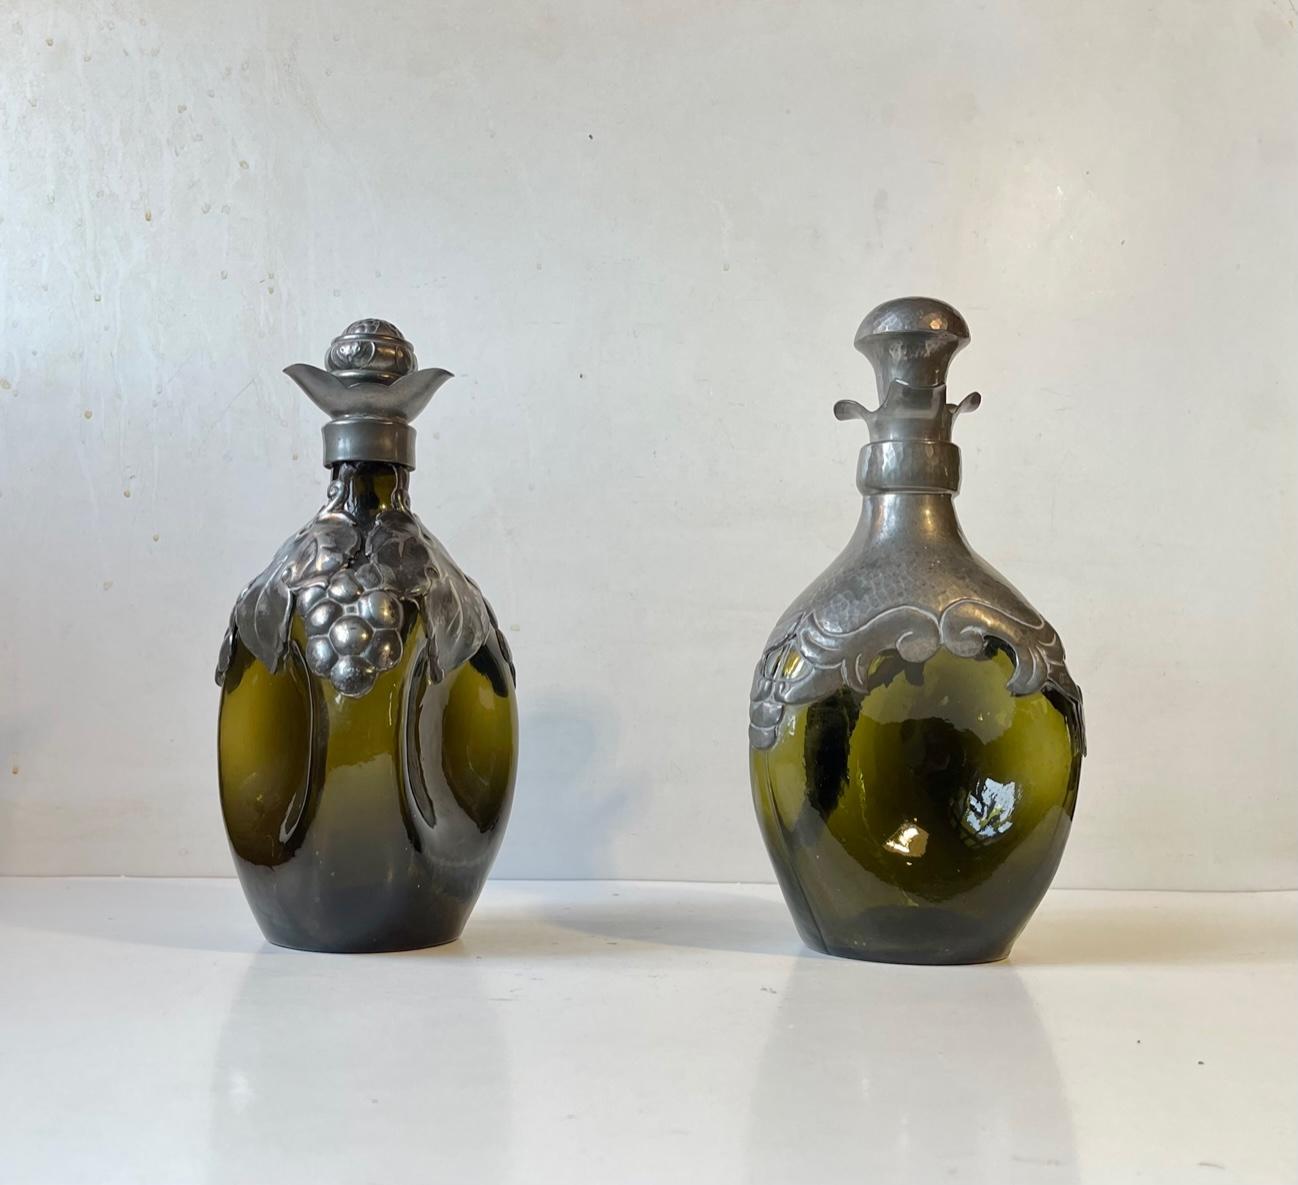 Et set of triangular decanters in green glass. Decorated with hand-set/crafted pewter mounts. Original stoppers in pewter and cork. Distinct Danish Skønvirke style the equivalent of art nouveau/Jugend/Arts and Crafts. Very reminiscent of Thorvald